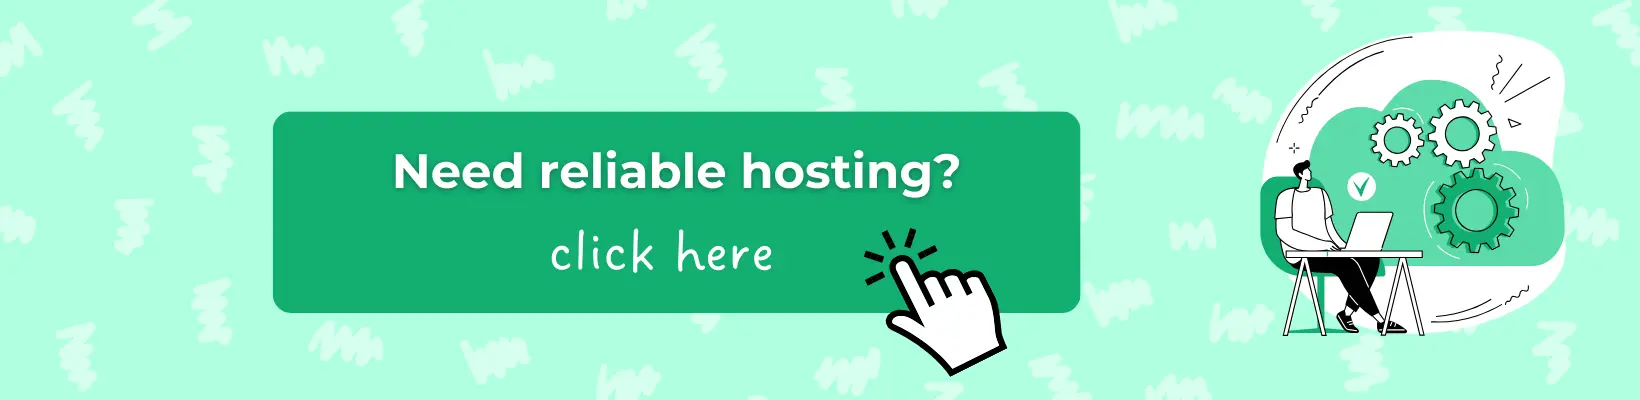 Buy website hosting from a reliable provider